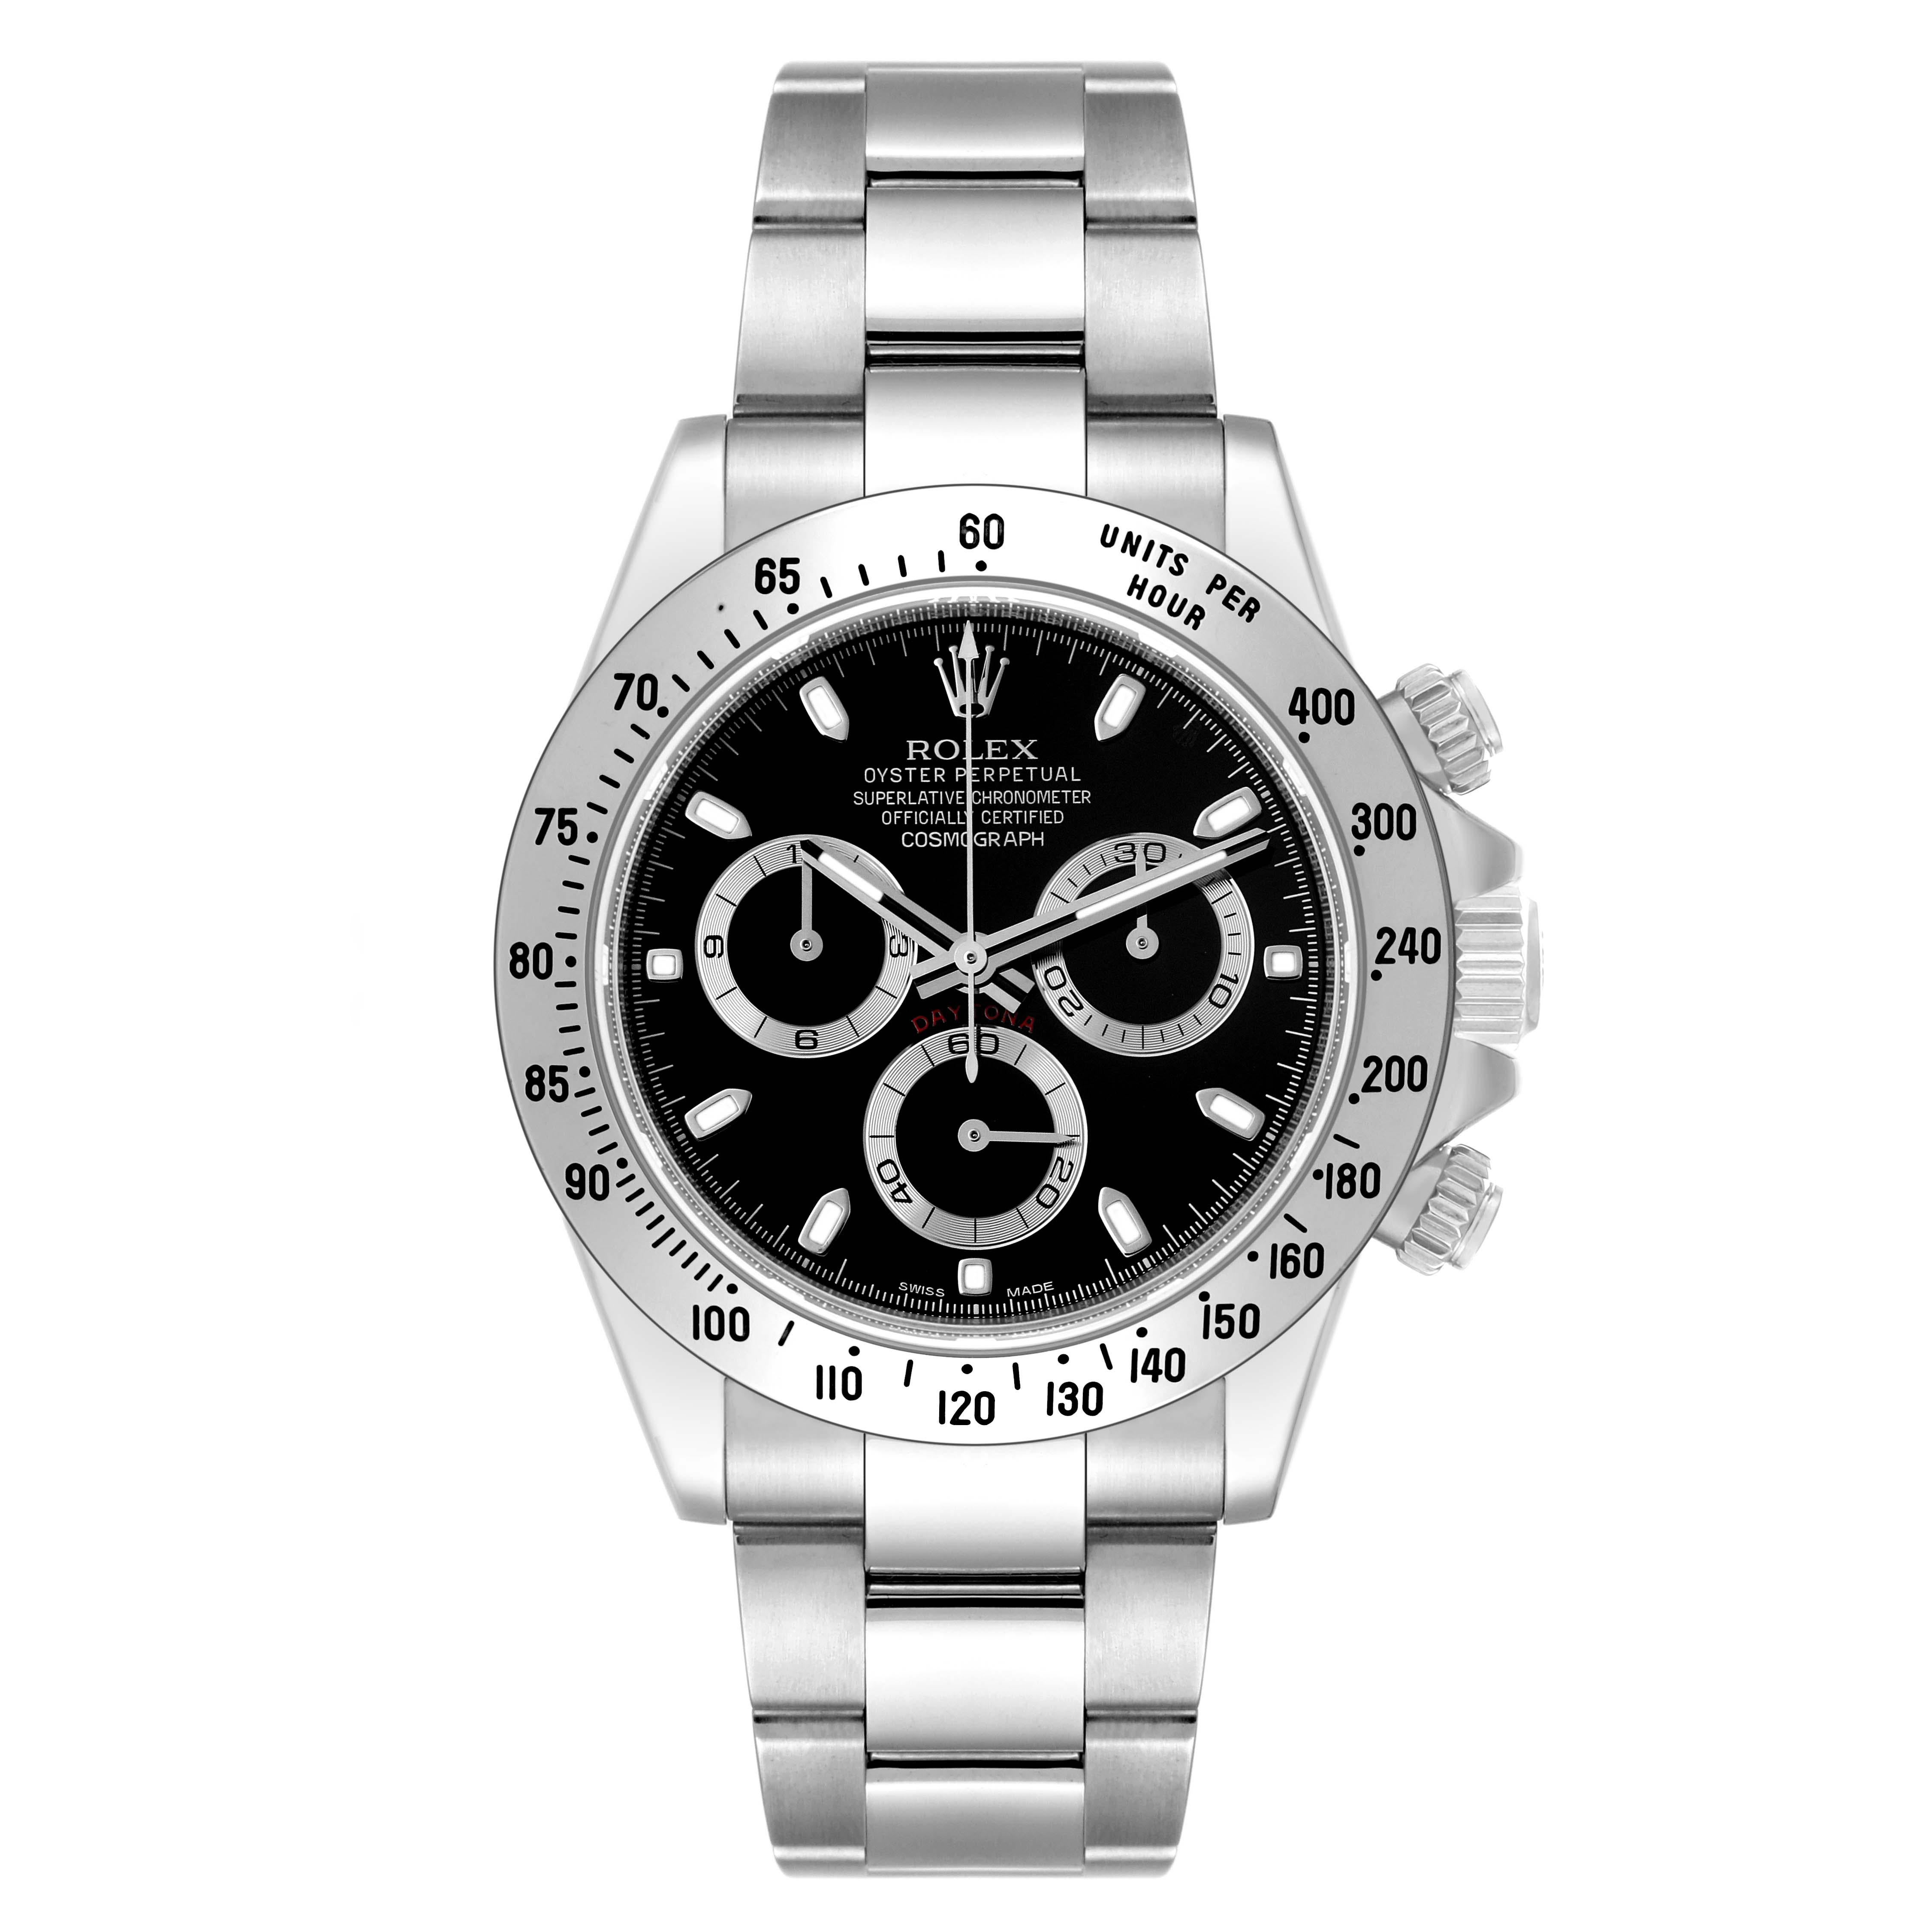 Rolex Daytona Chronograph Black Dial Steel Mens Watch 116520 Box Card. Officially certified chronometer automatic self-winding movement. Stainless steel case 40 mm in diameter. Special screw-down push buttons. Polished stainless steel bezel with